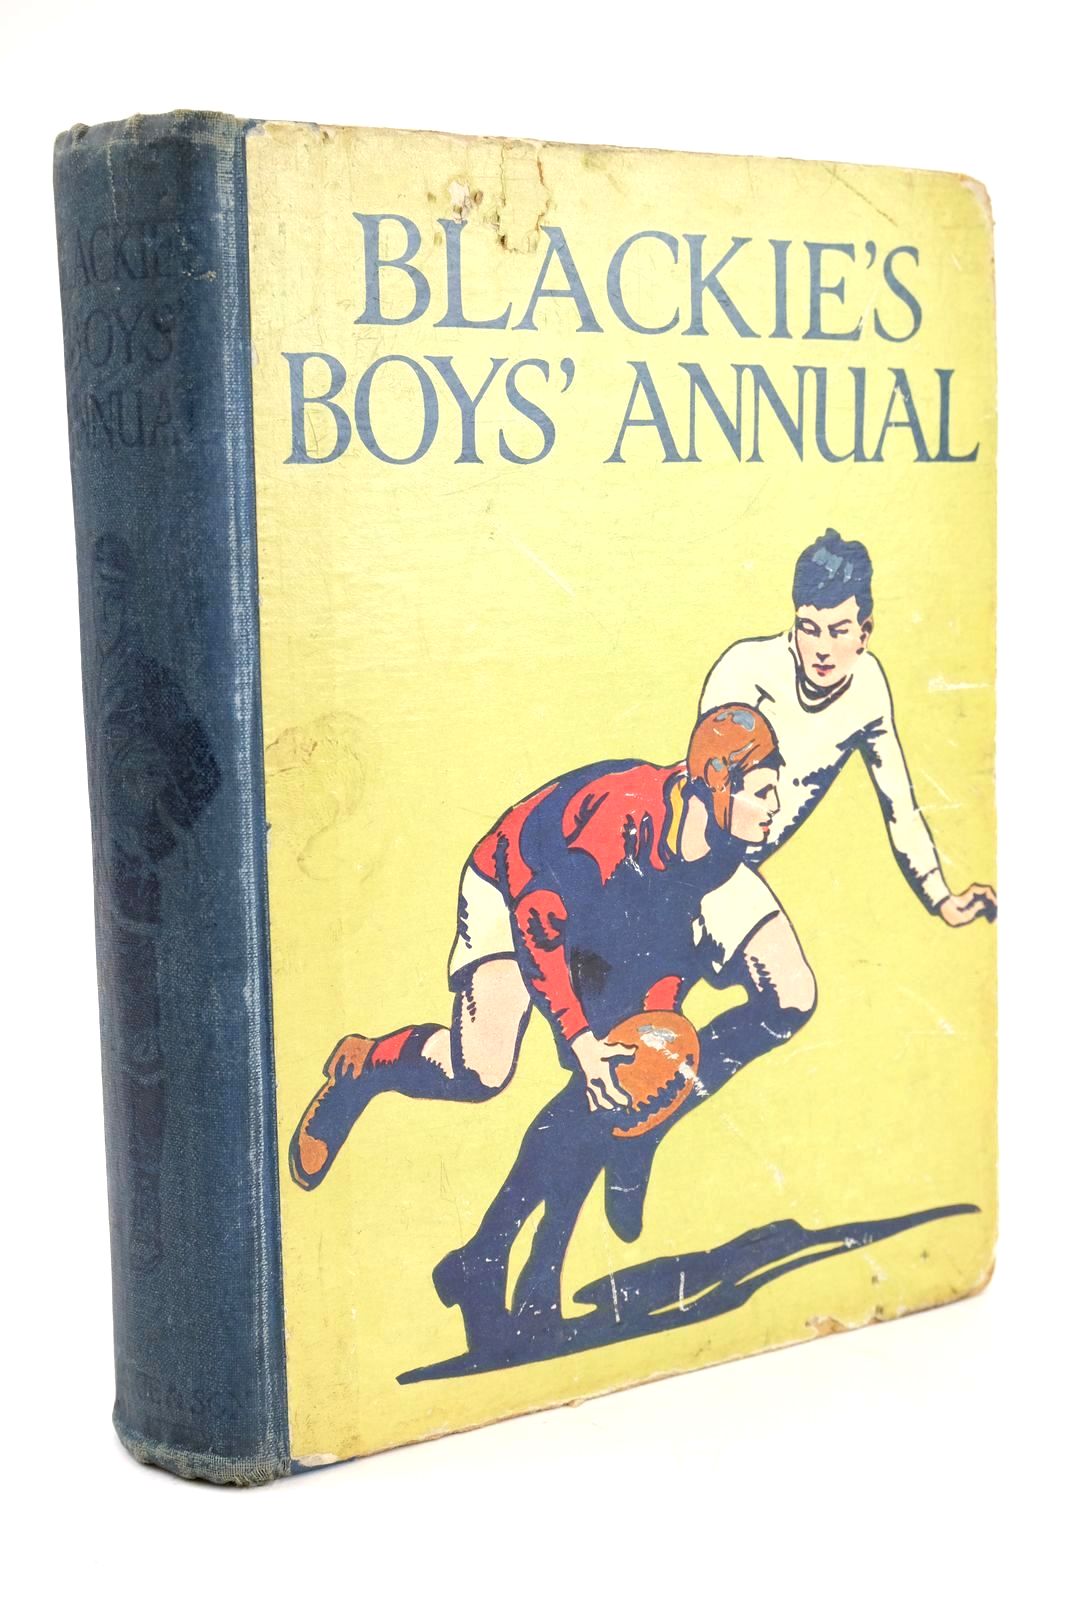 Photo of BLACKIE'S BOYS' ANNUAL written by Westerman, Percy F. Batten, H. Mortimer Cleaver, Hylton Cowper, E.E. et al, illustrated by Wigfull, W. Edward Reynolds, Warwick Brock, H.M. Pears, Chas. et al., published by Blackie &amp; Son Ltd. (STOCK CODE: 1324779)  for sale by Stella & Rose's Books